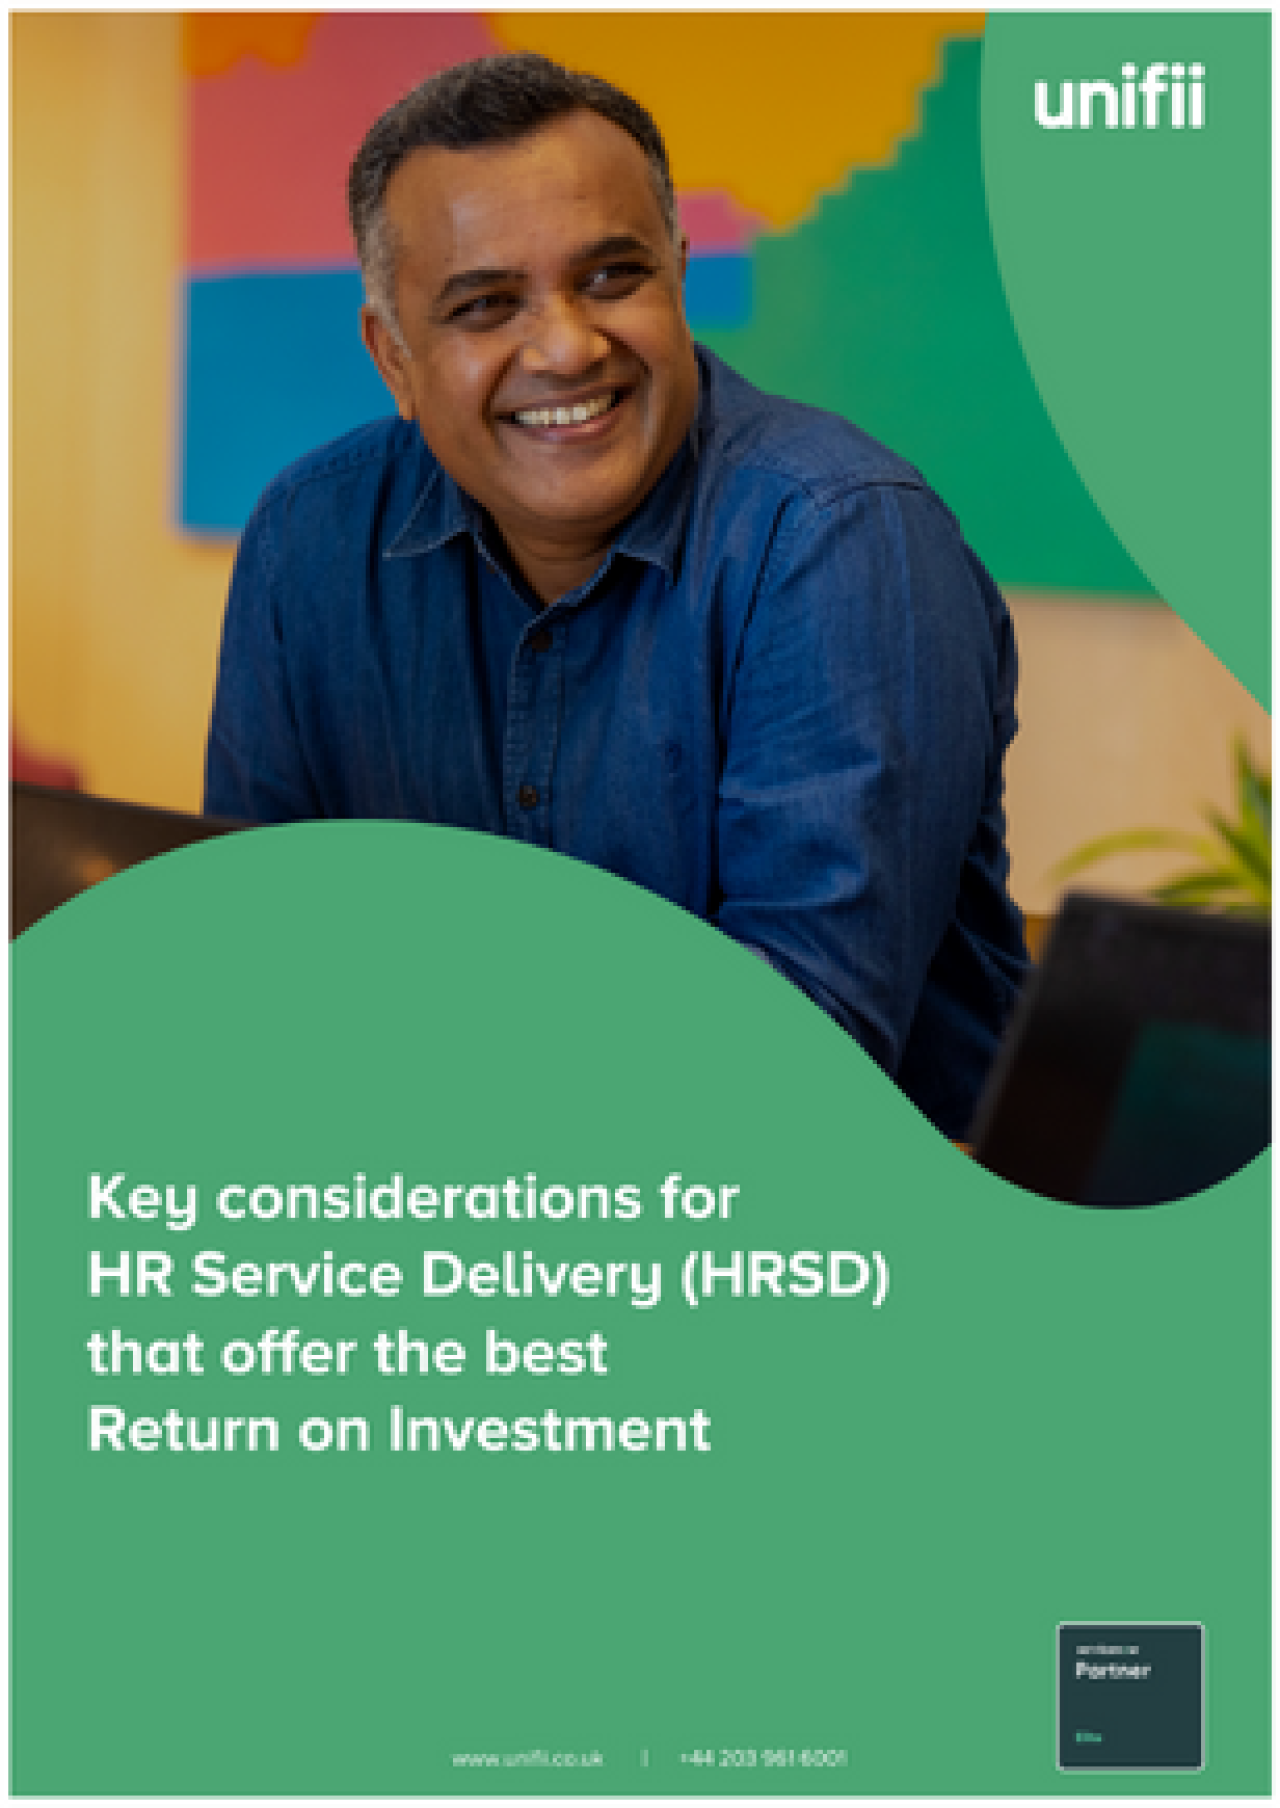 Key considerations for HR Service Delivery (HRSD) that offer the best Return on Investment.